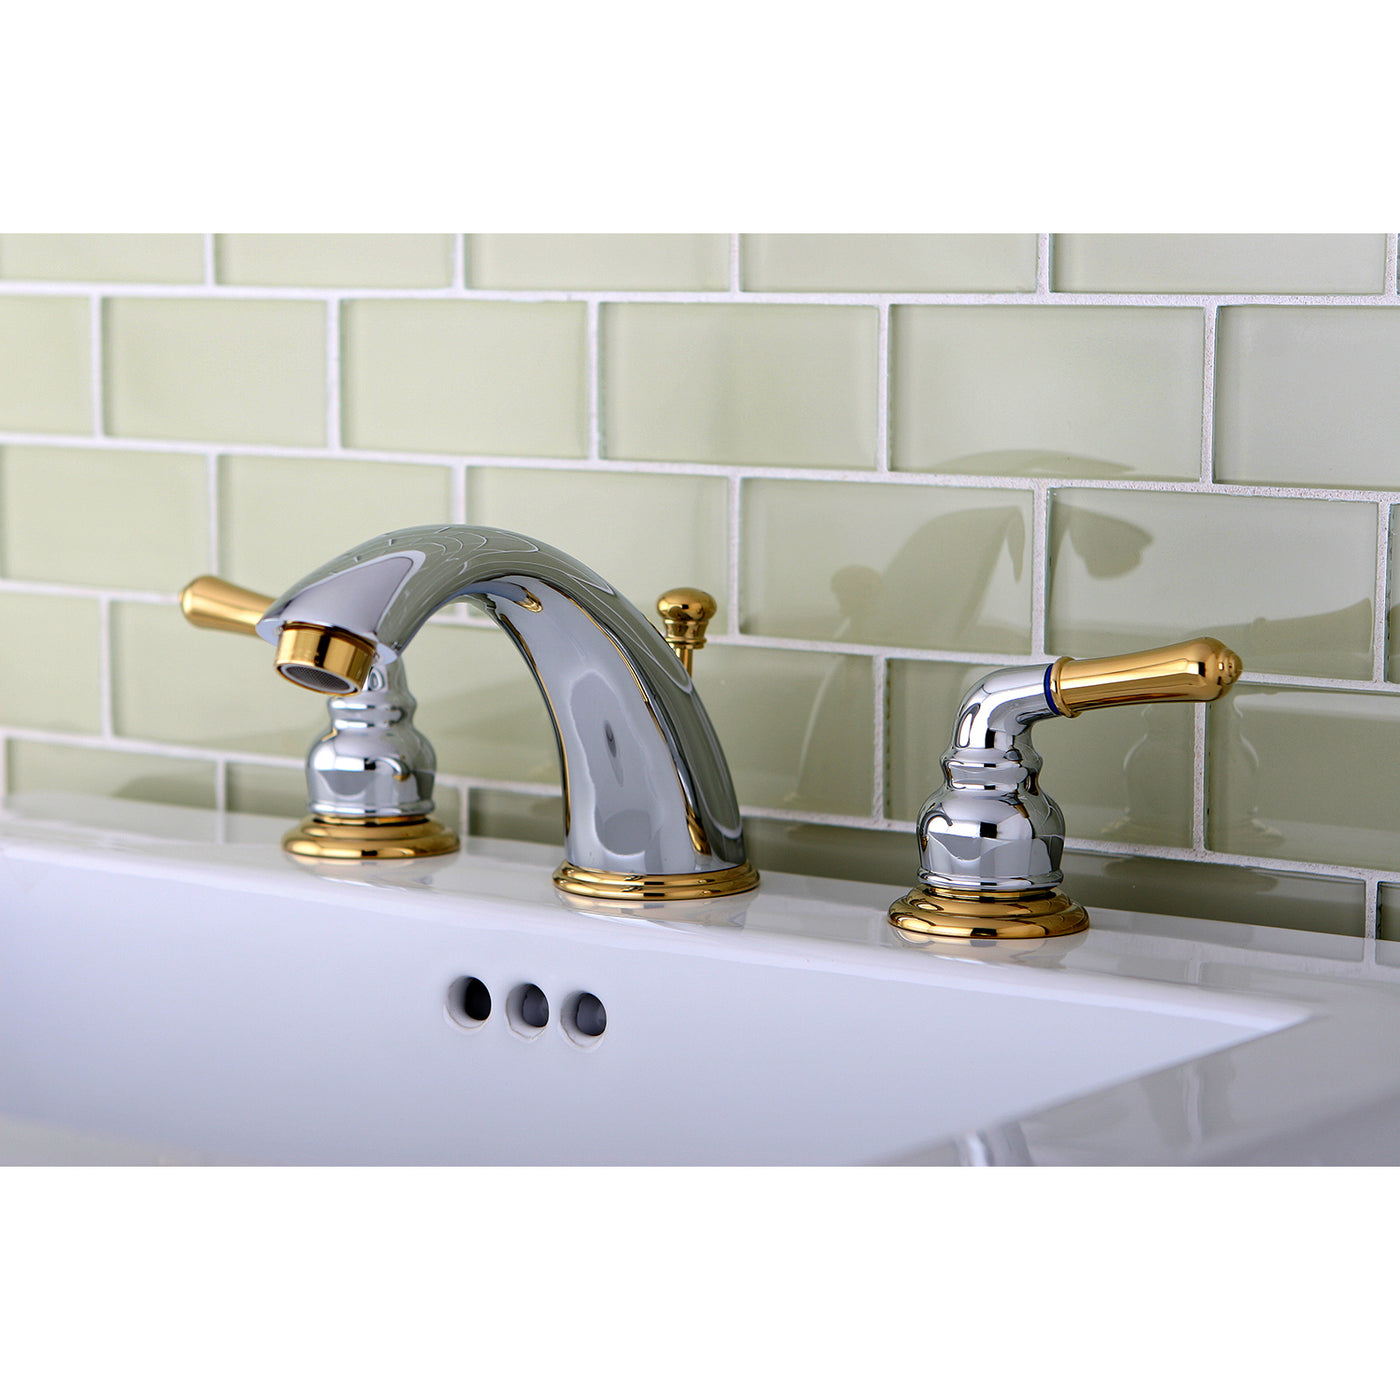 Elements of Design EB964 Widespread Bathroom Faucet with Retail Pop-Up, Polished Chrome/Polished Brass